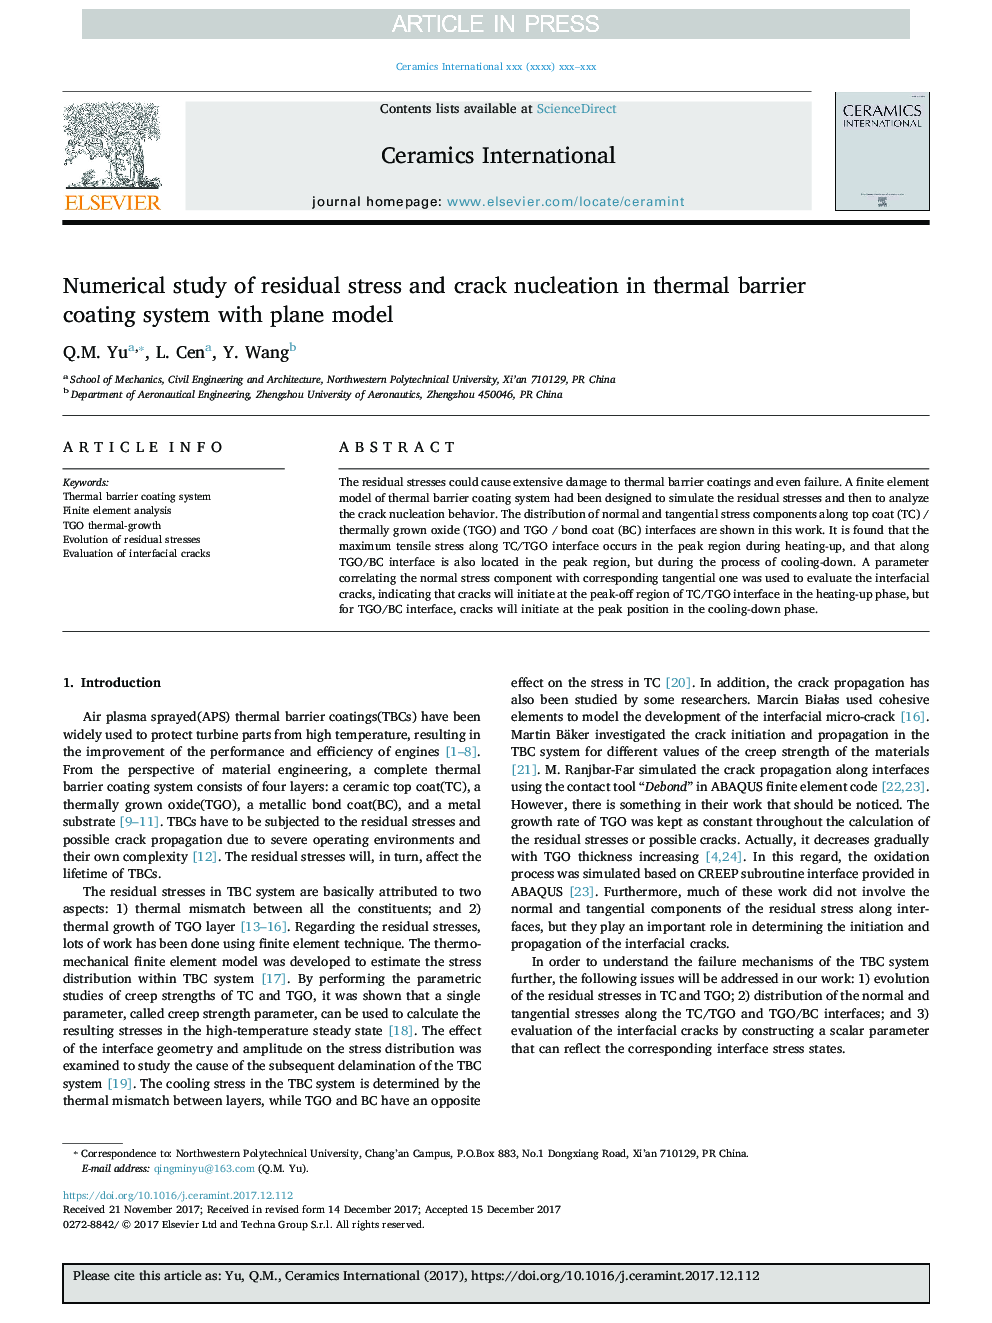 Numerical study of residual stress and crack nucleation in thermal barrier  coating system with plane model